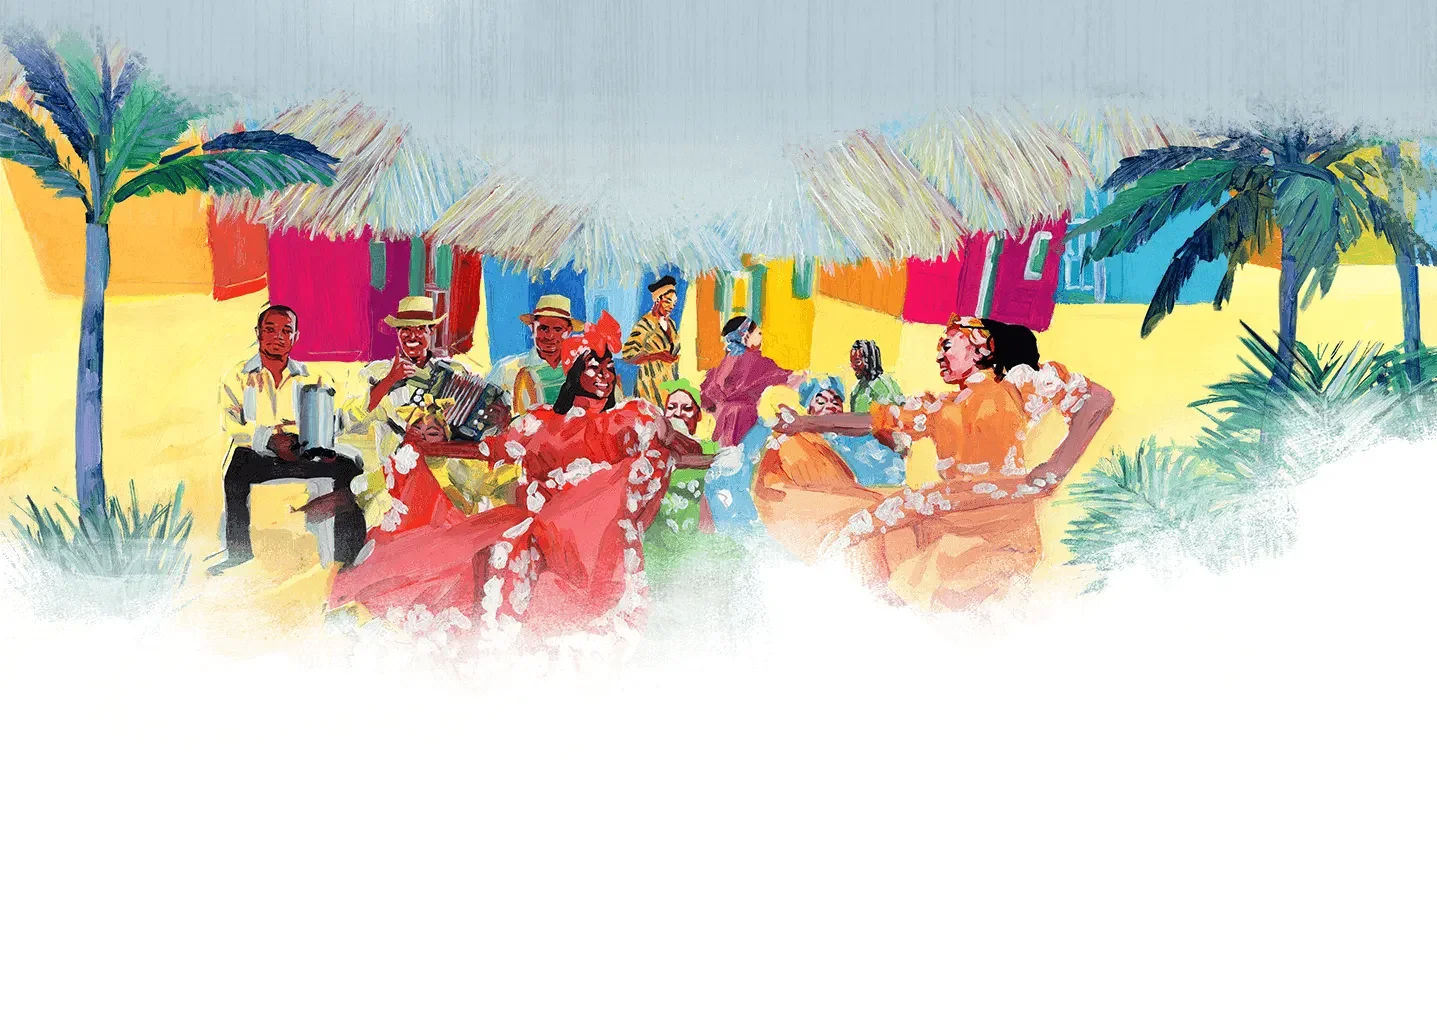 Colorful artwork of the dominican lifestyle - dancing women with musicians in the background and palms and houses.